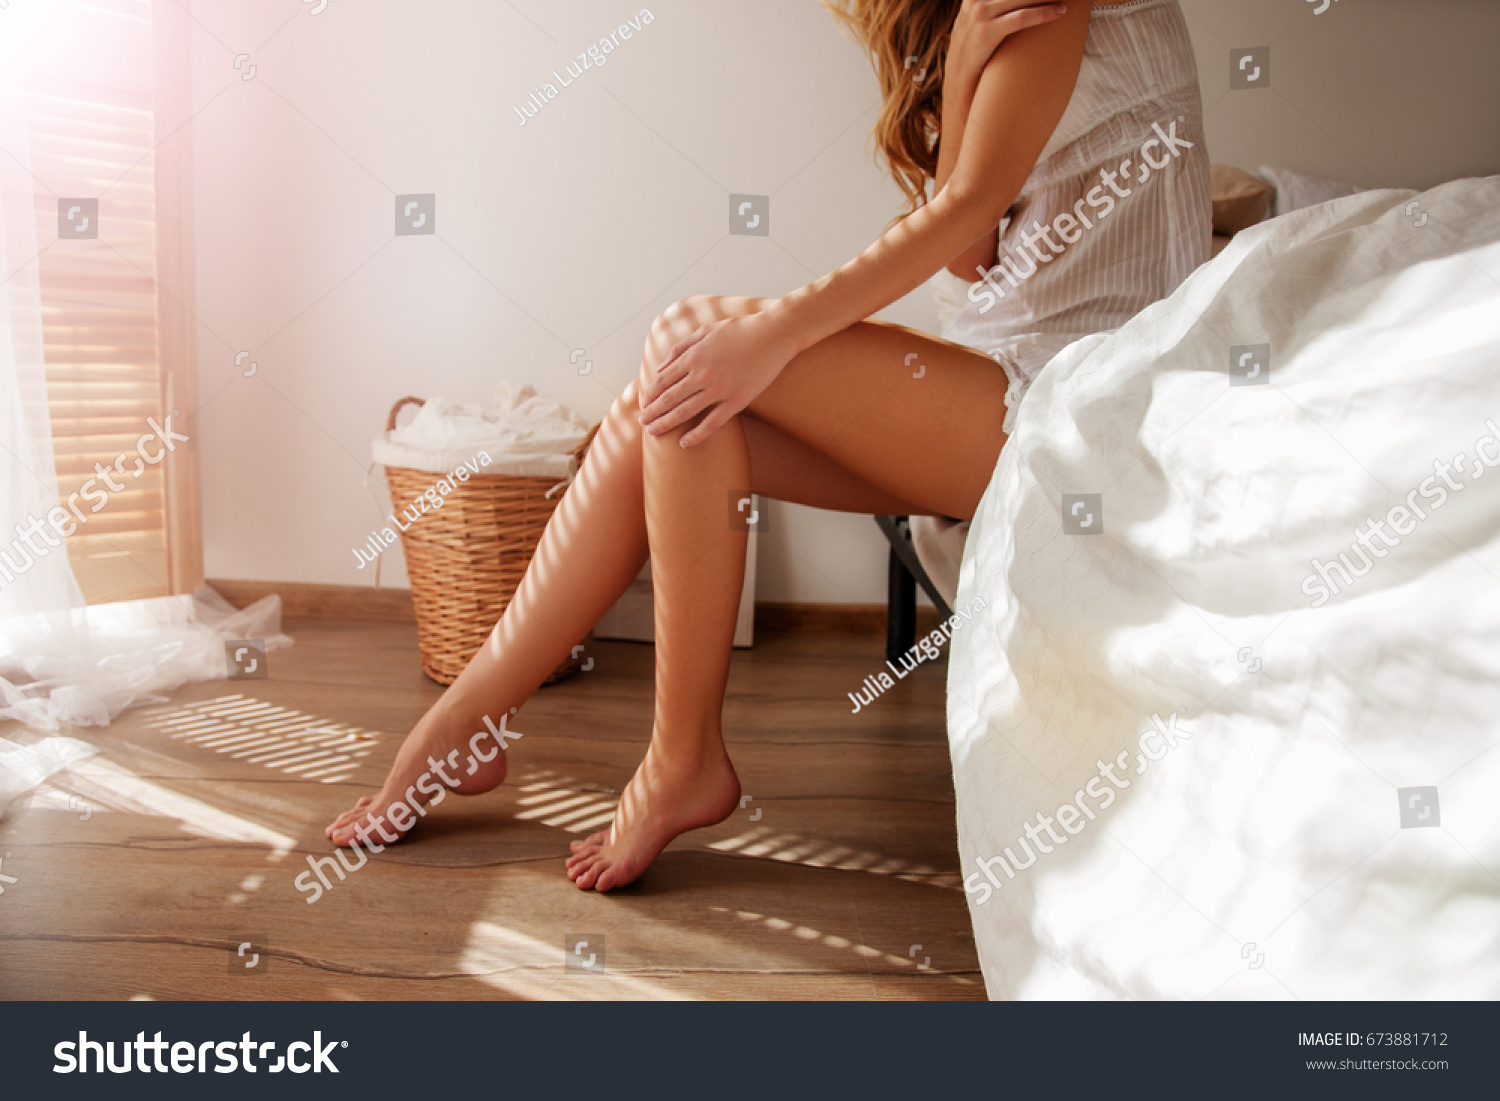 Awakened Woman Sitting on the edge of the Bed looking out the Window, bare Feet on the Floor. Side view, cropped Photo of Beautiful Female Legs. Spring rays of the sun penetrate through wooden blinds  #673881712